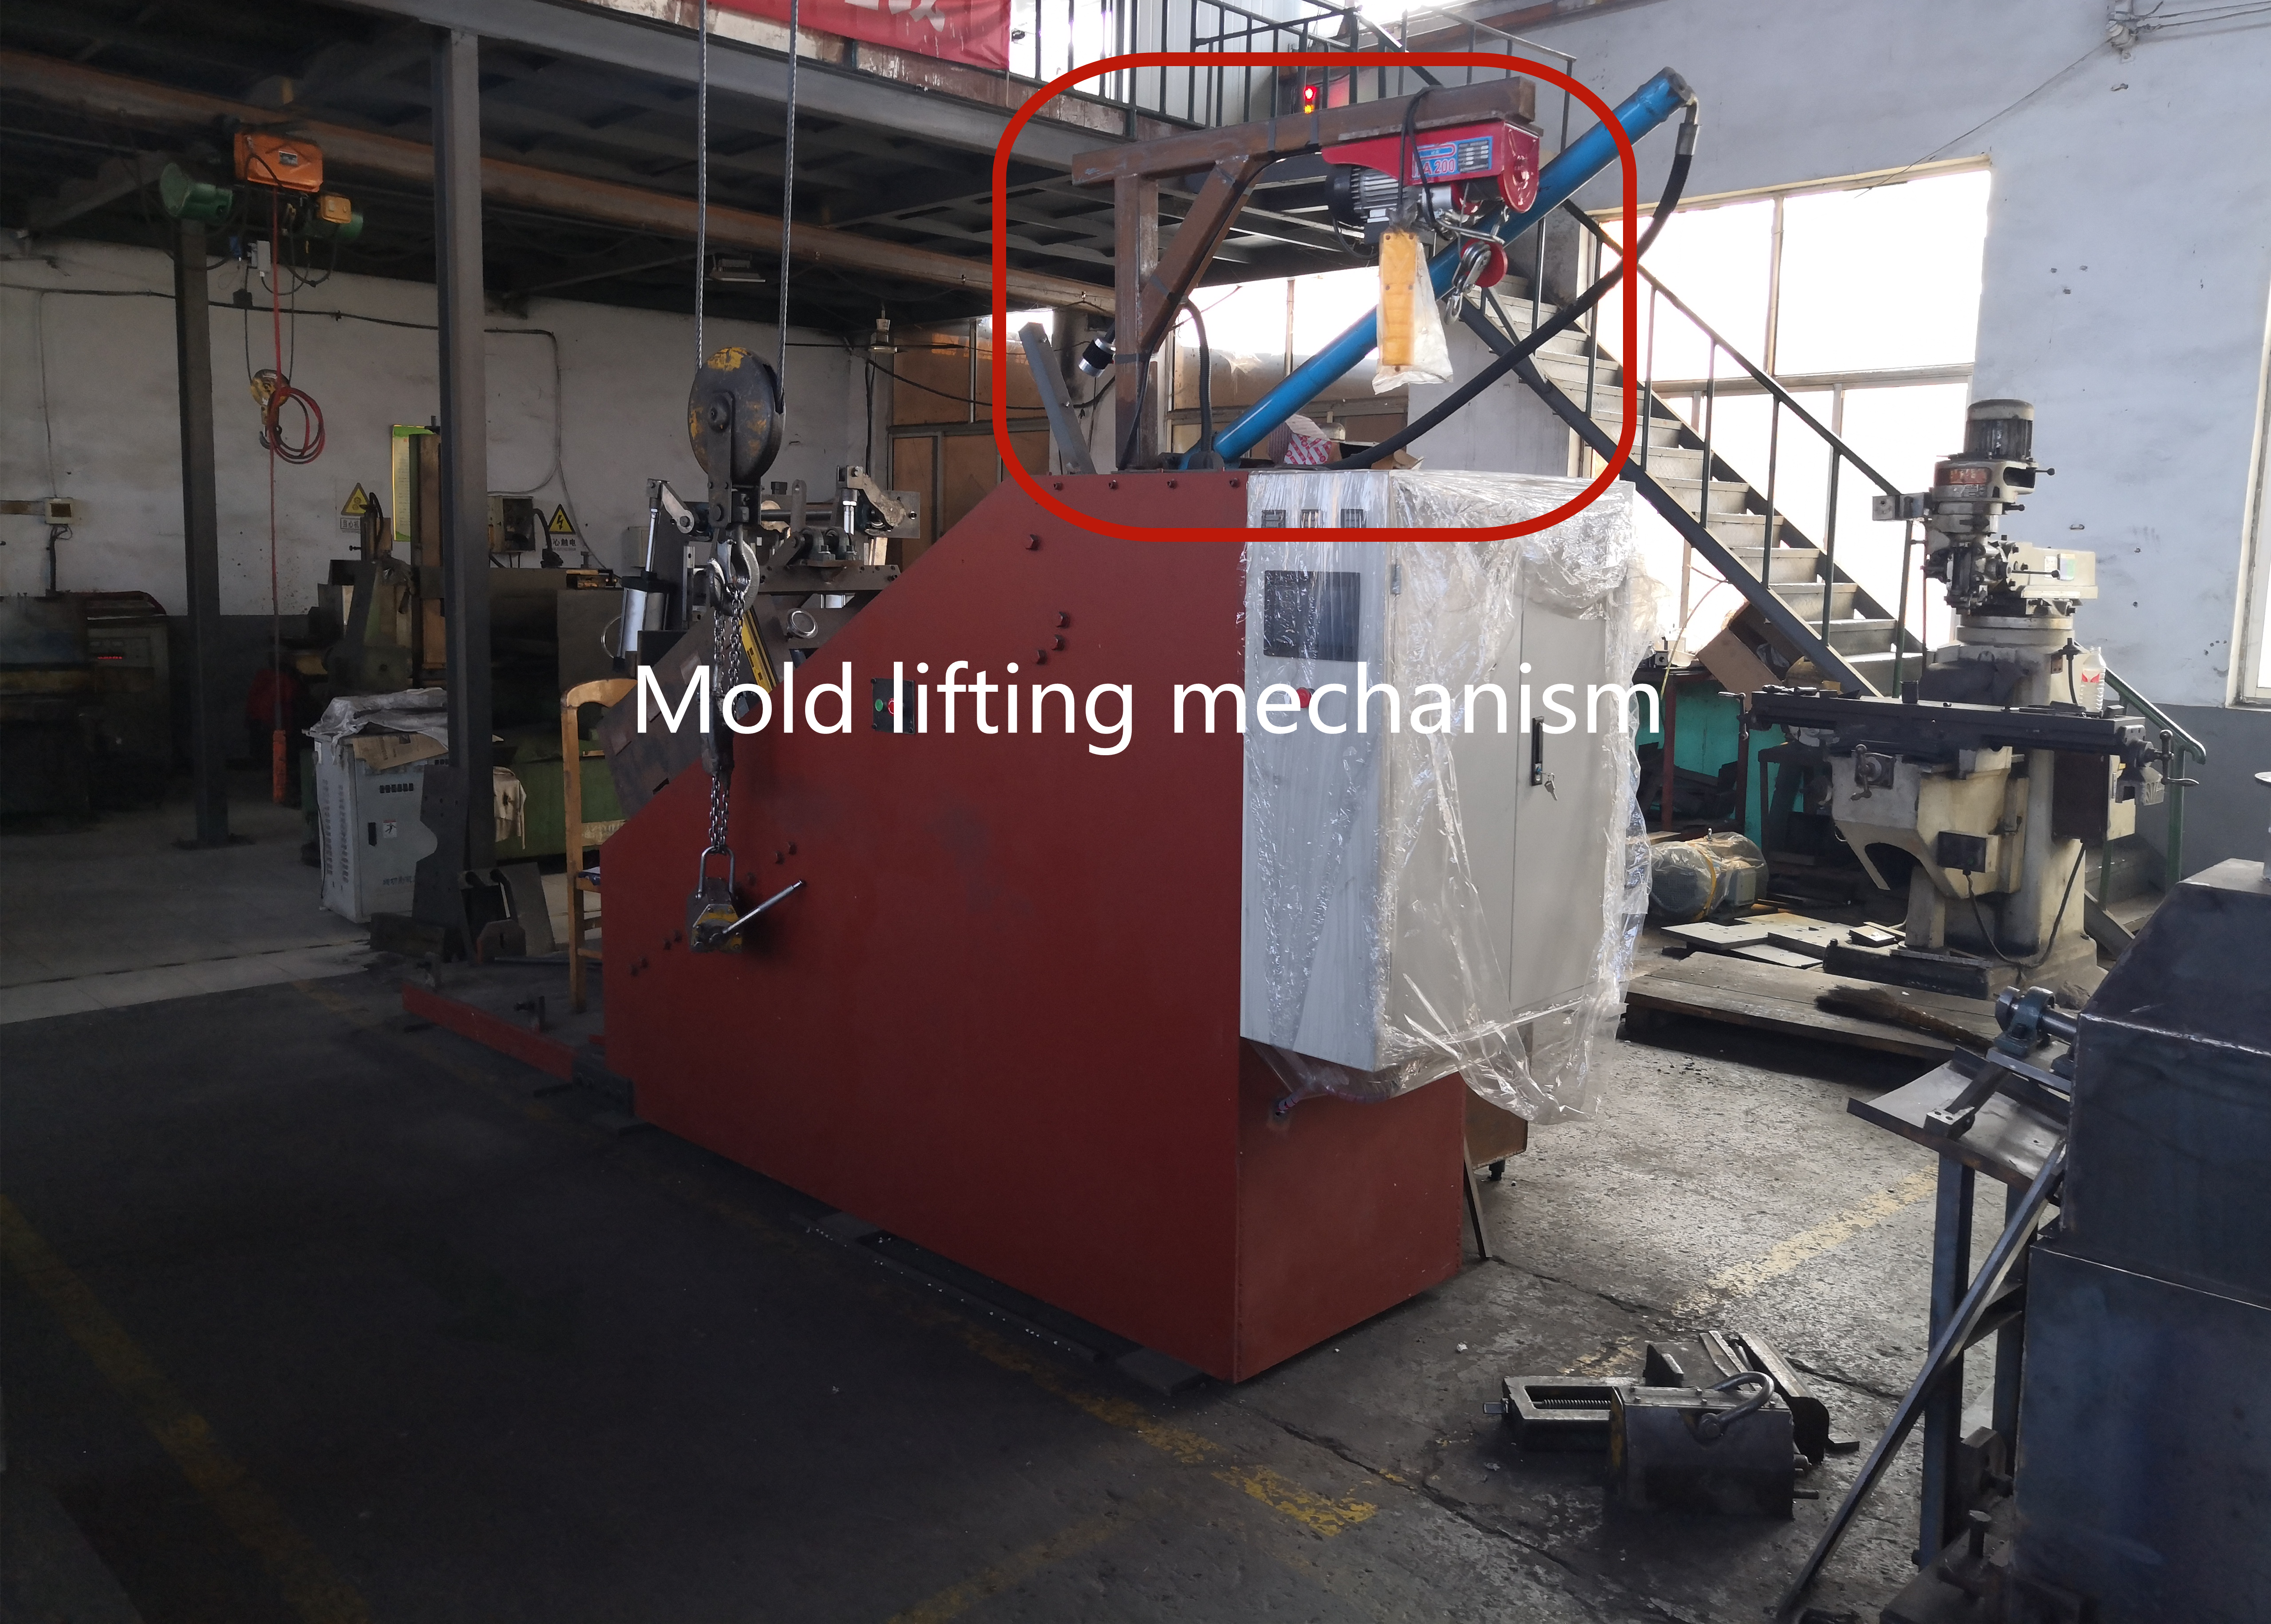 spine casting mold lifting mechanism